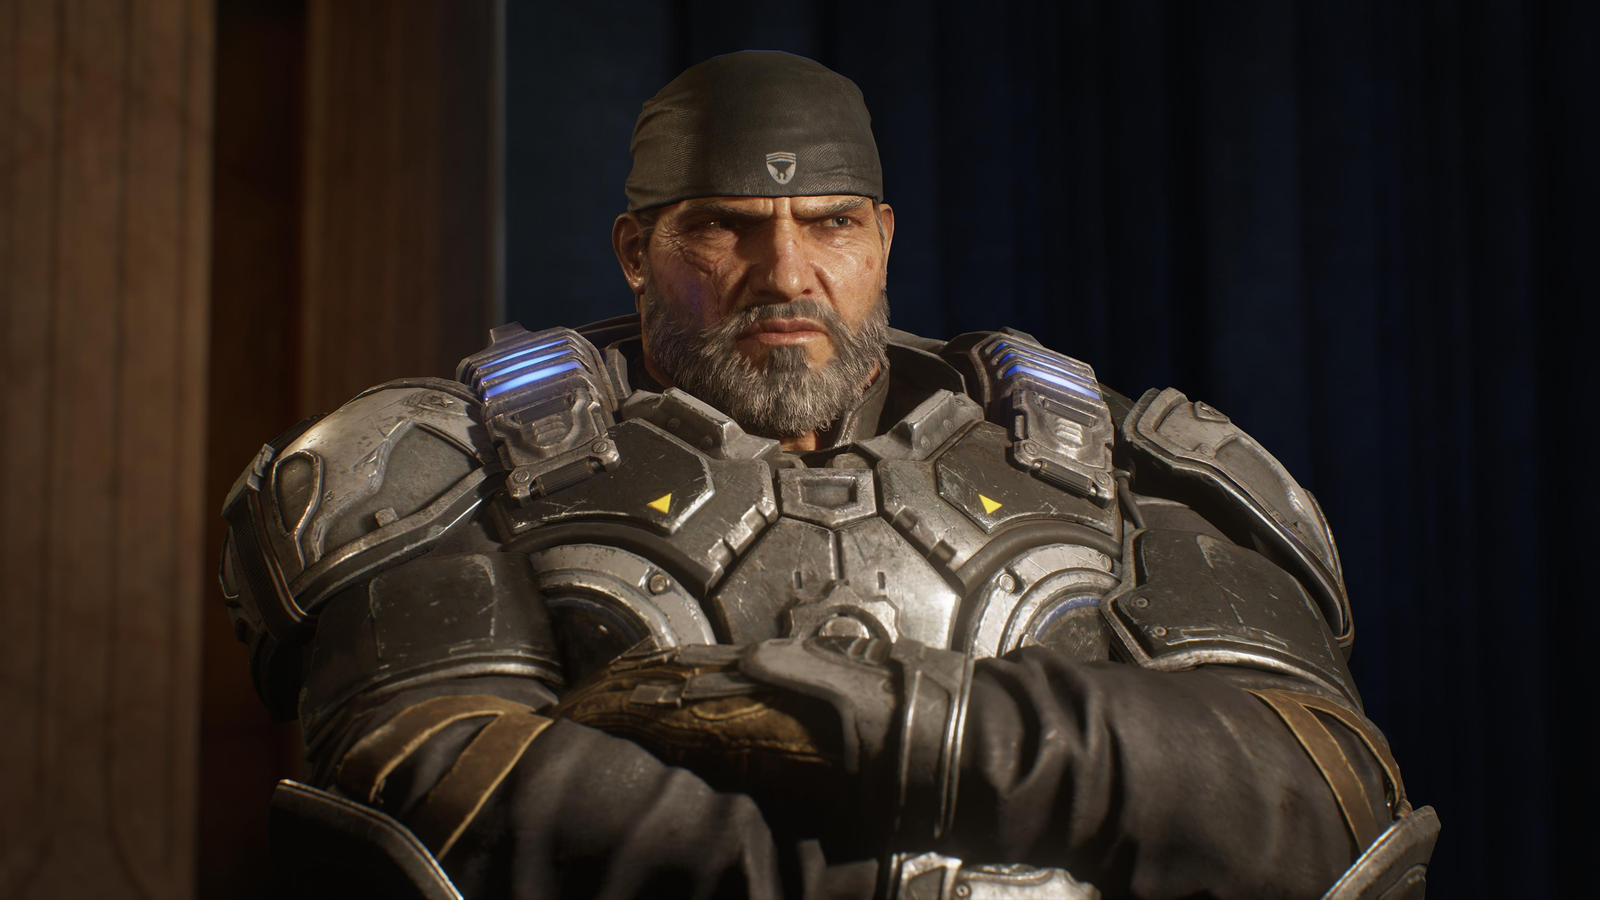 Gears 5 development coming to an end, The Coalition moving to next-gen only  Unreal Engine 5